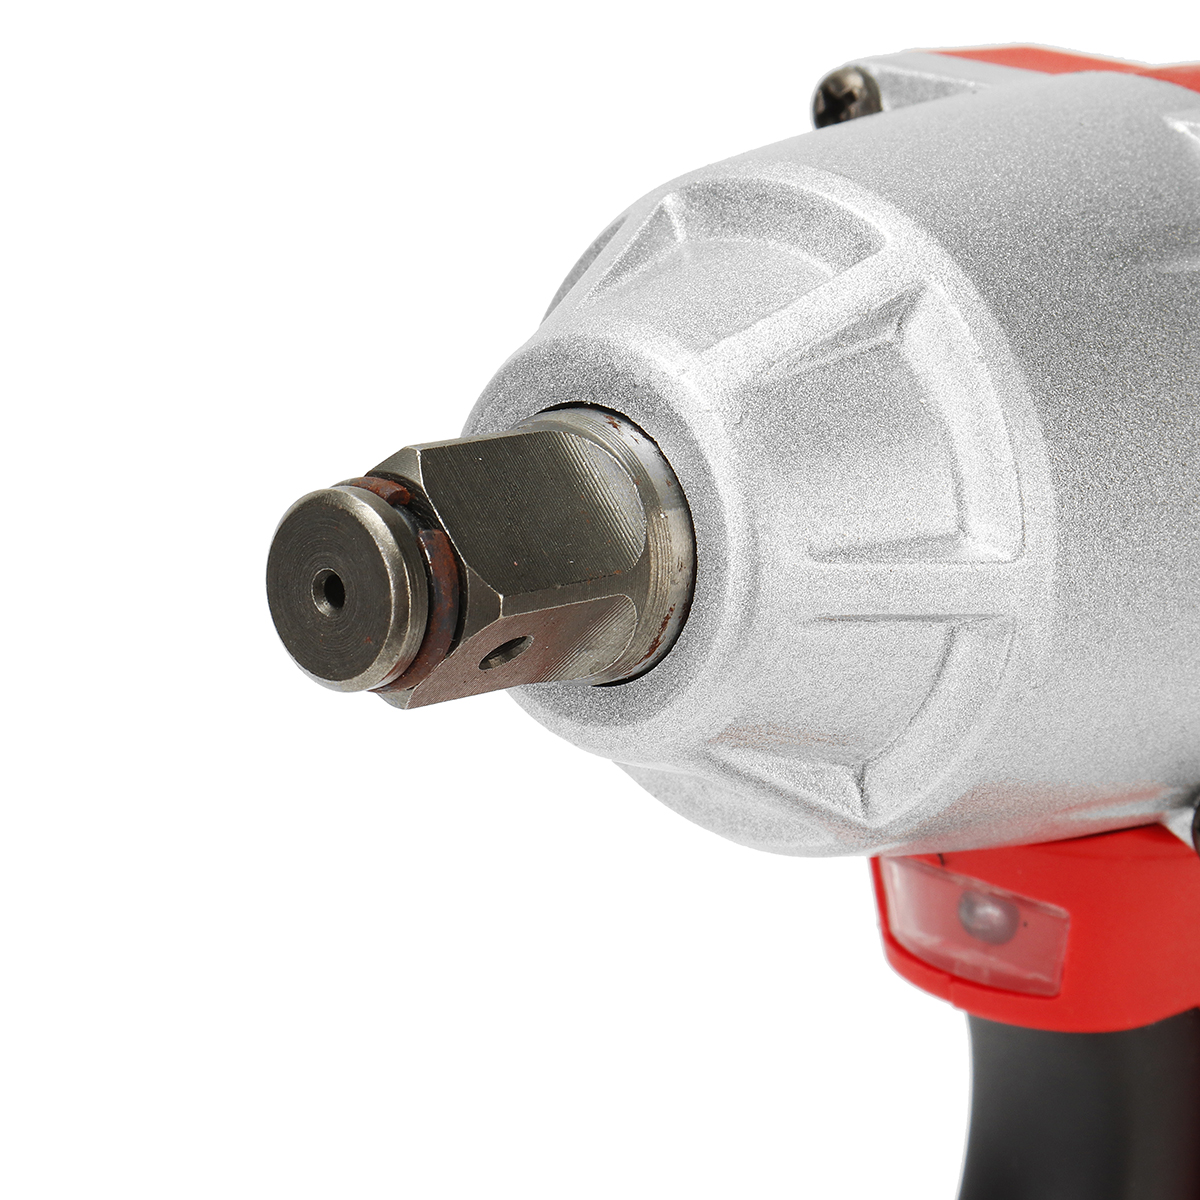 168VF-12quot-320NM-Electric-Cordless-Impact-Wrench-With-12000mAh-Li-ion-1600833-7